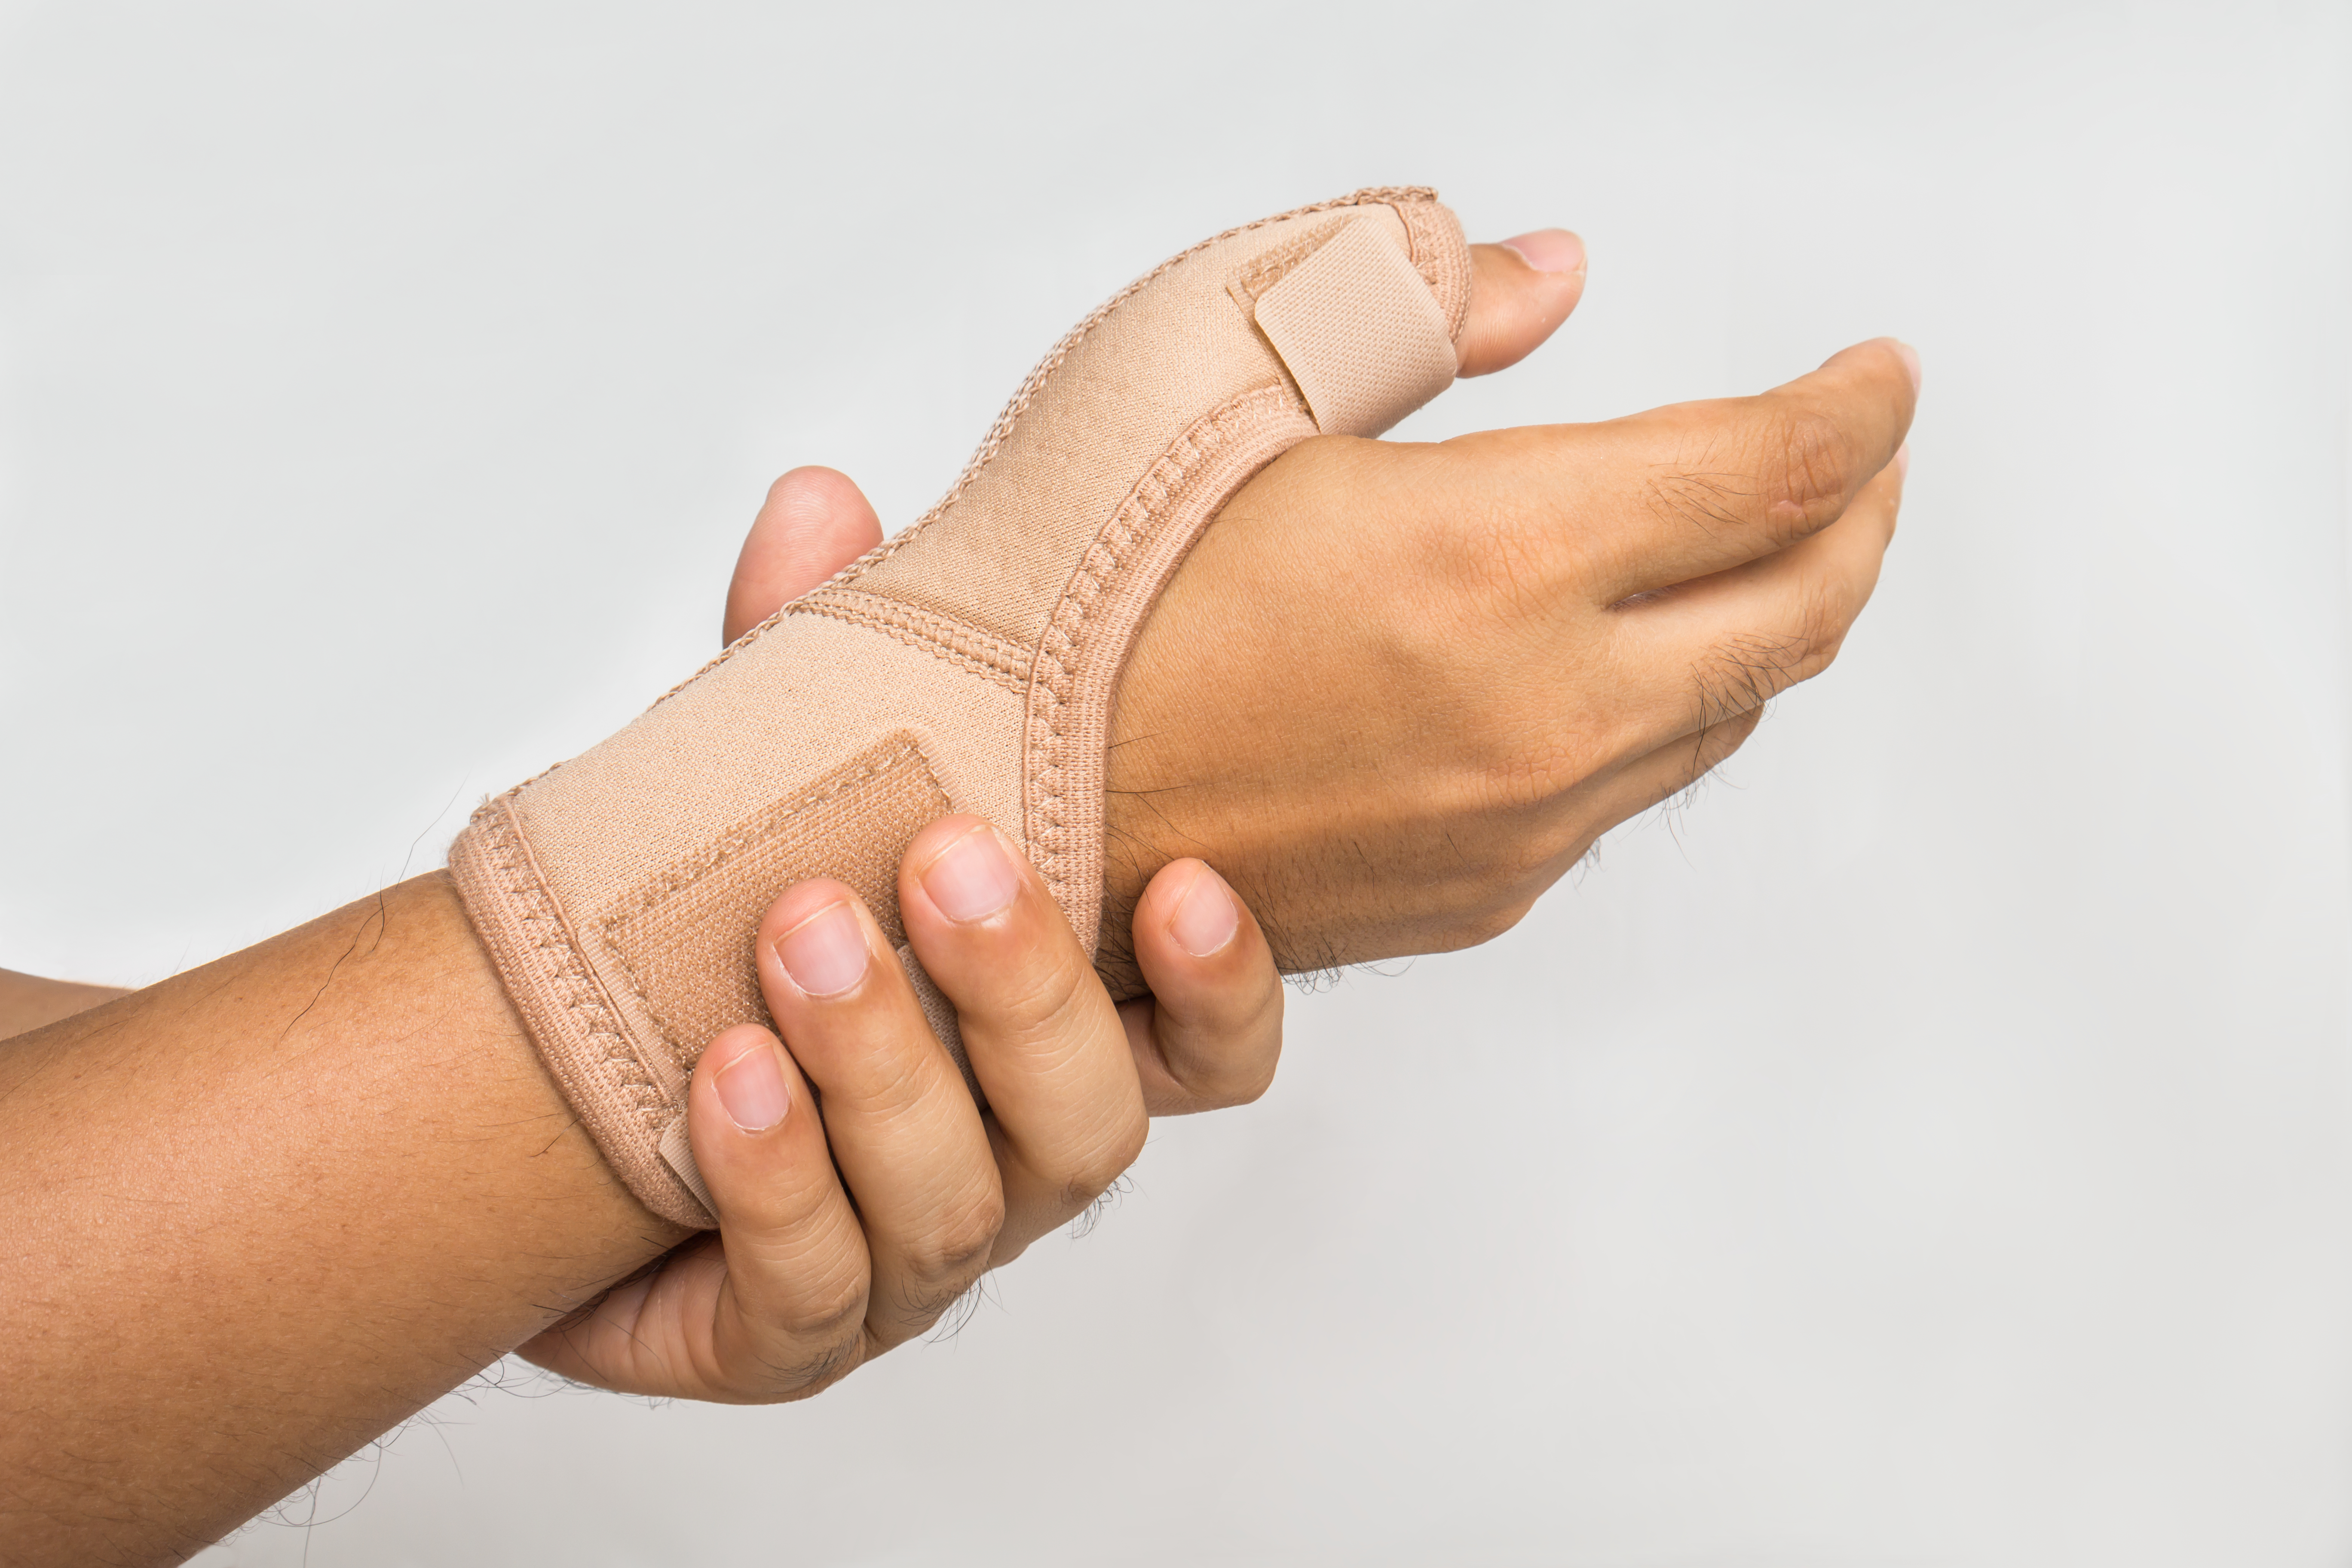 Injury hand with wrist supporter